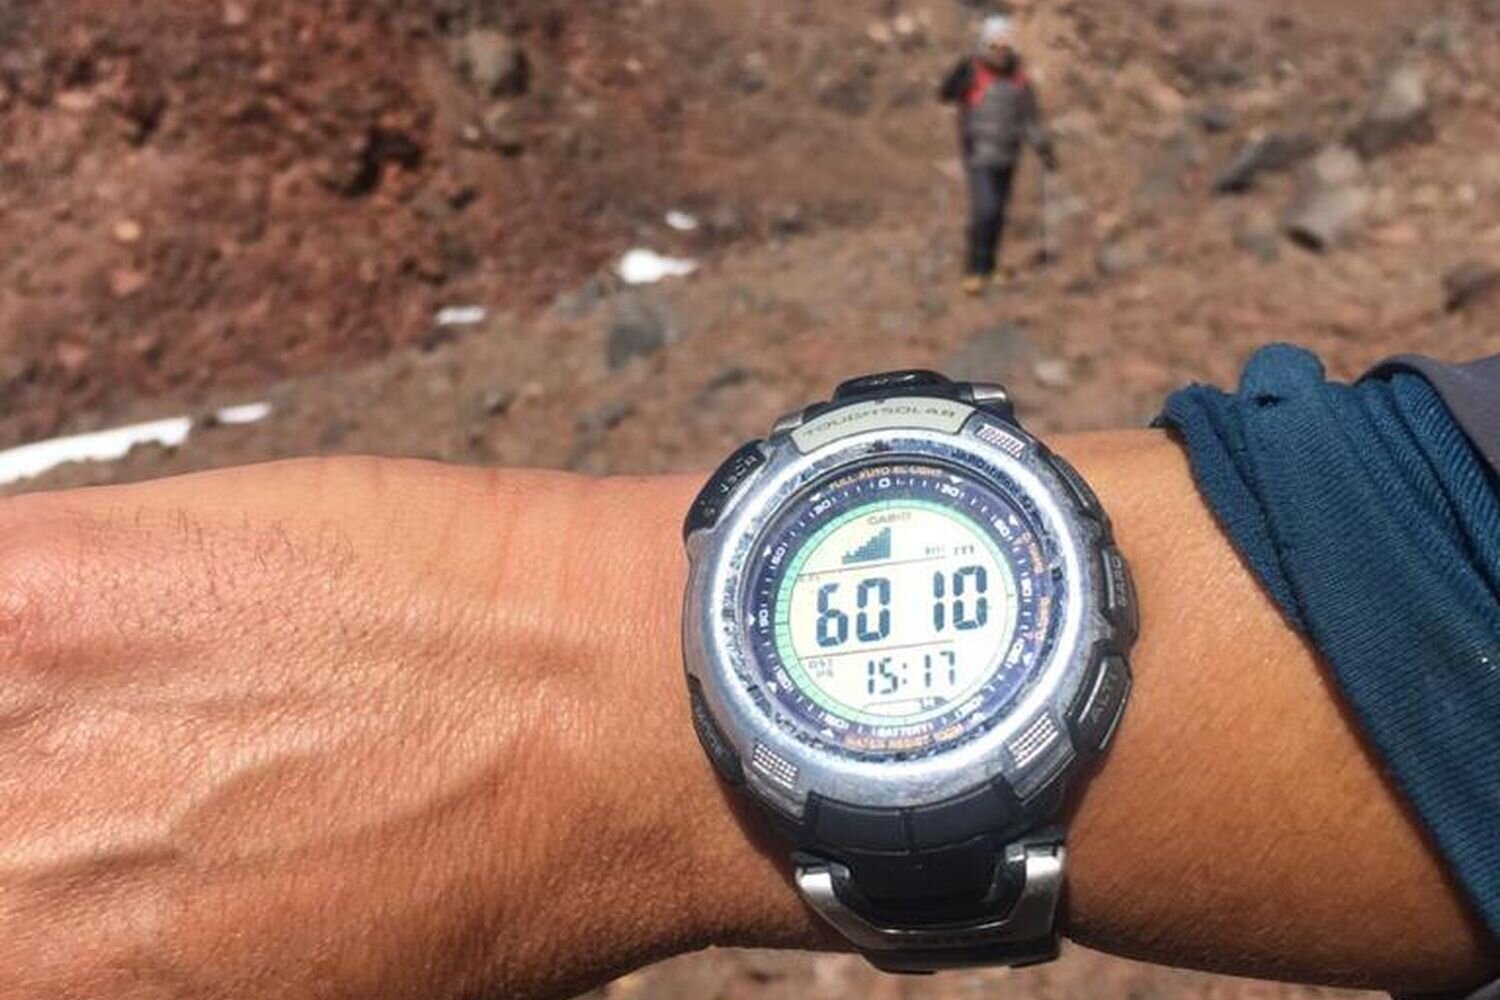  A guide shows the altitude on his watch, a few meters below Pili volcano summit. Chilean Altiplano. 